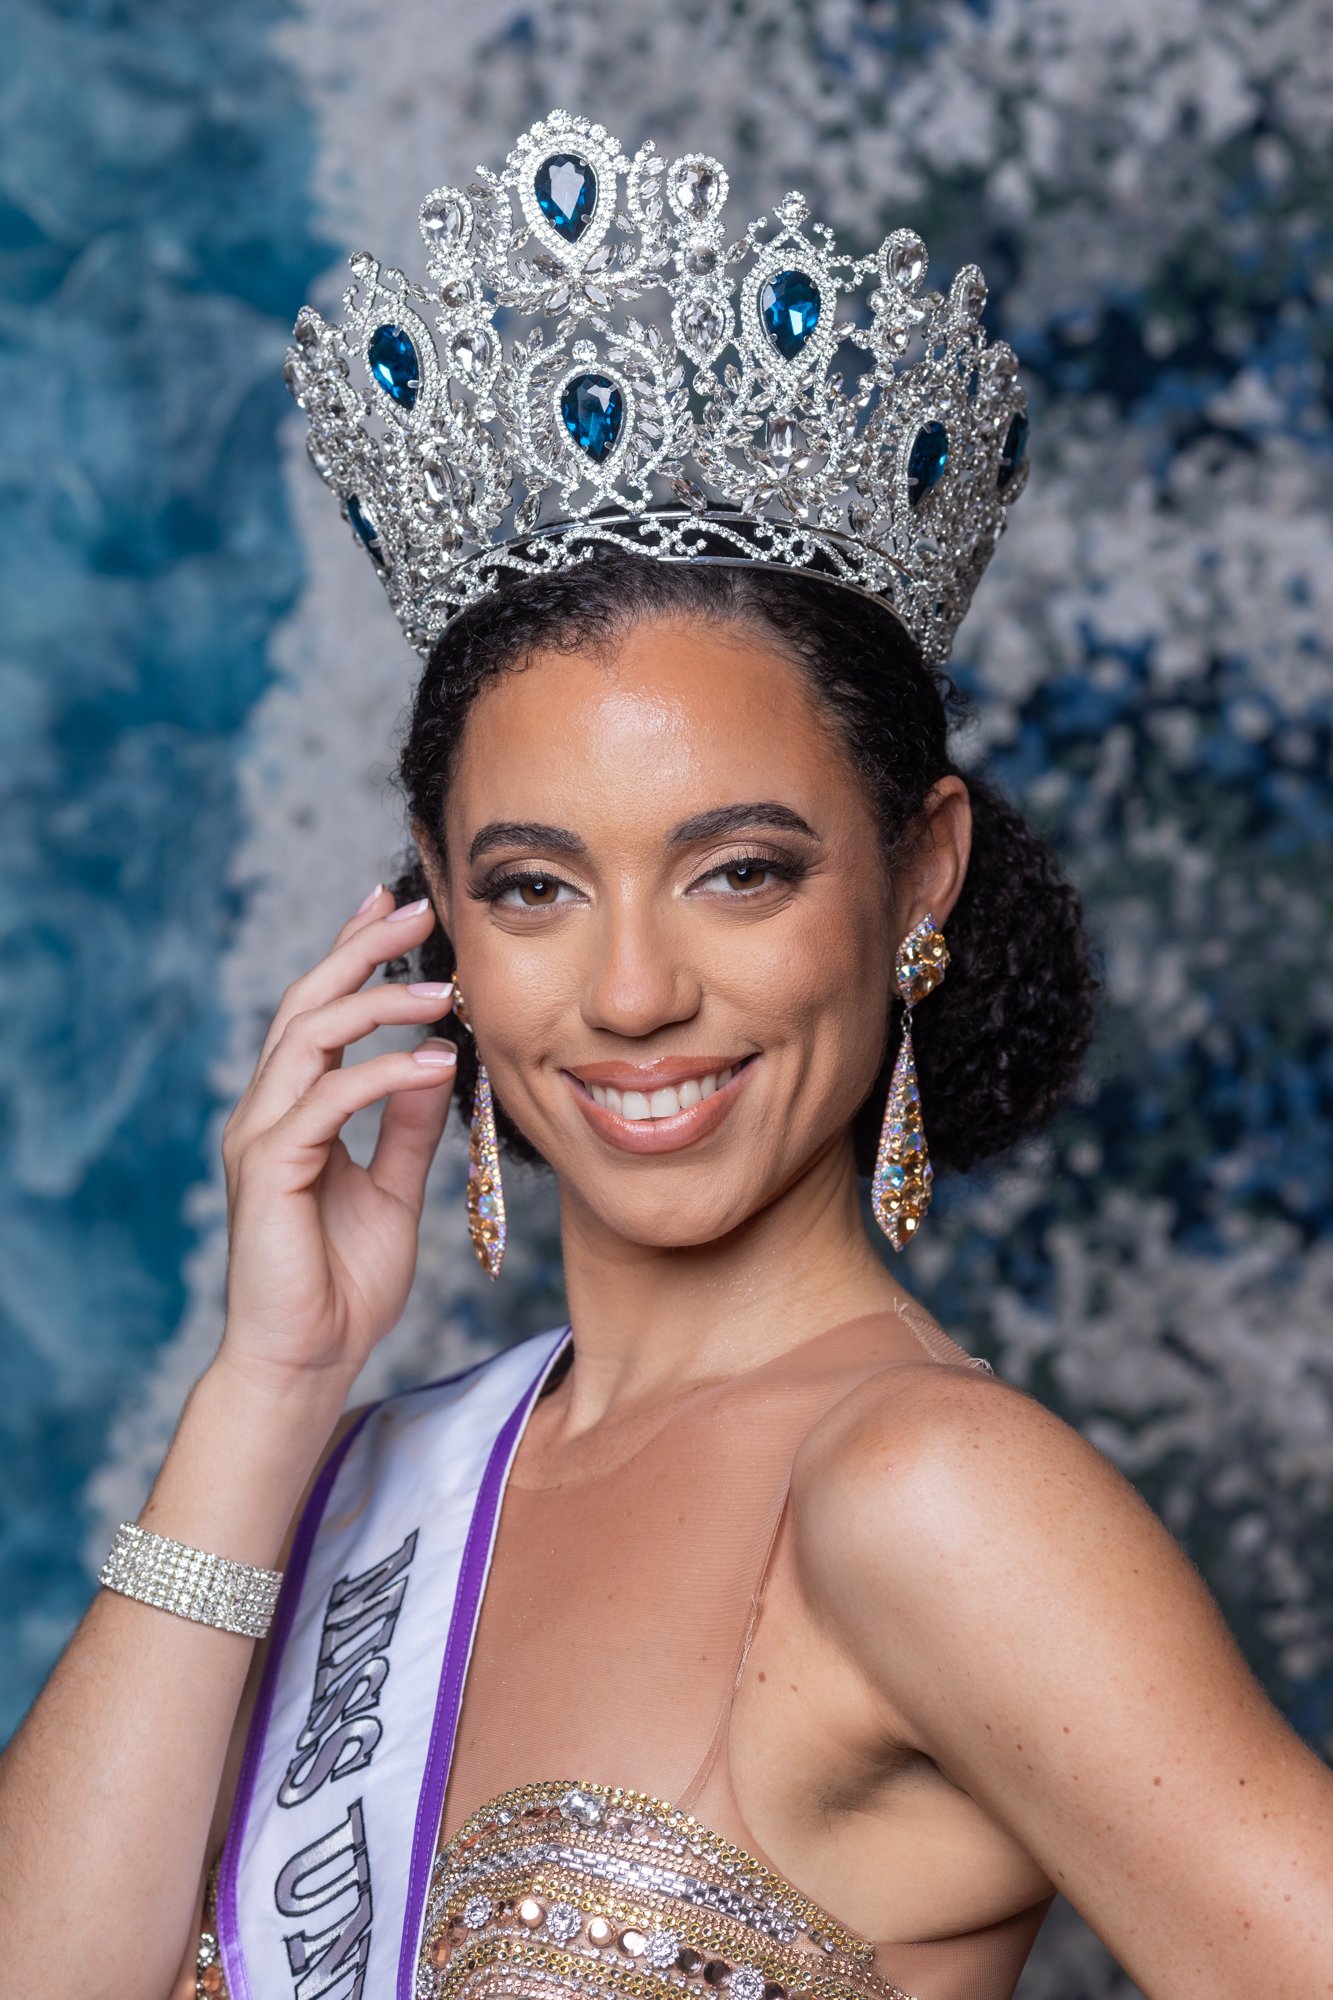 Here are the Miss Universe Cayman Islands 2023 candidates